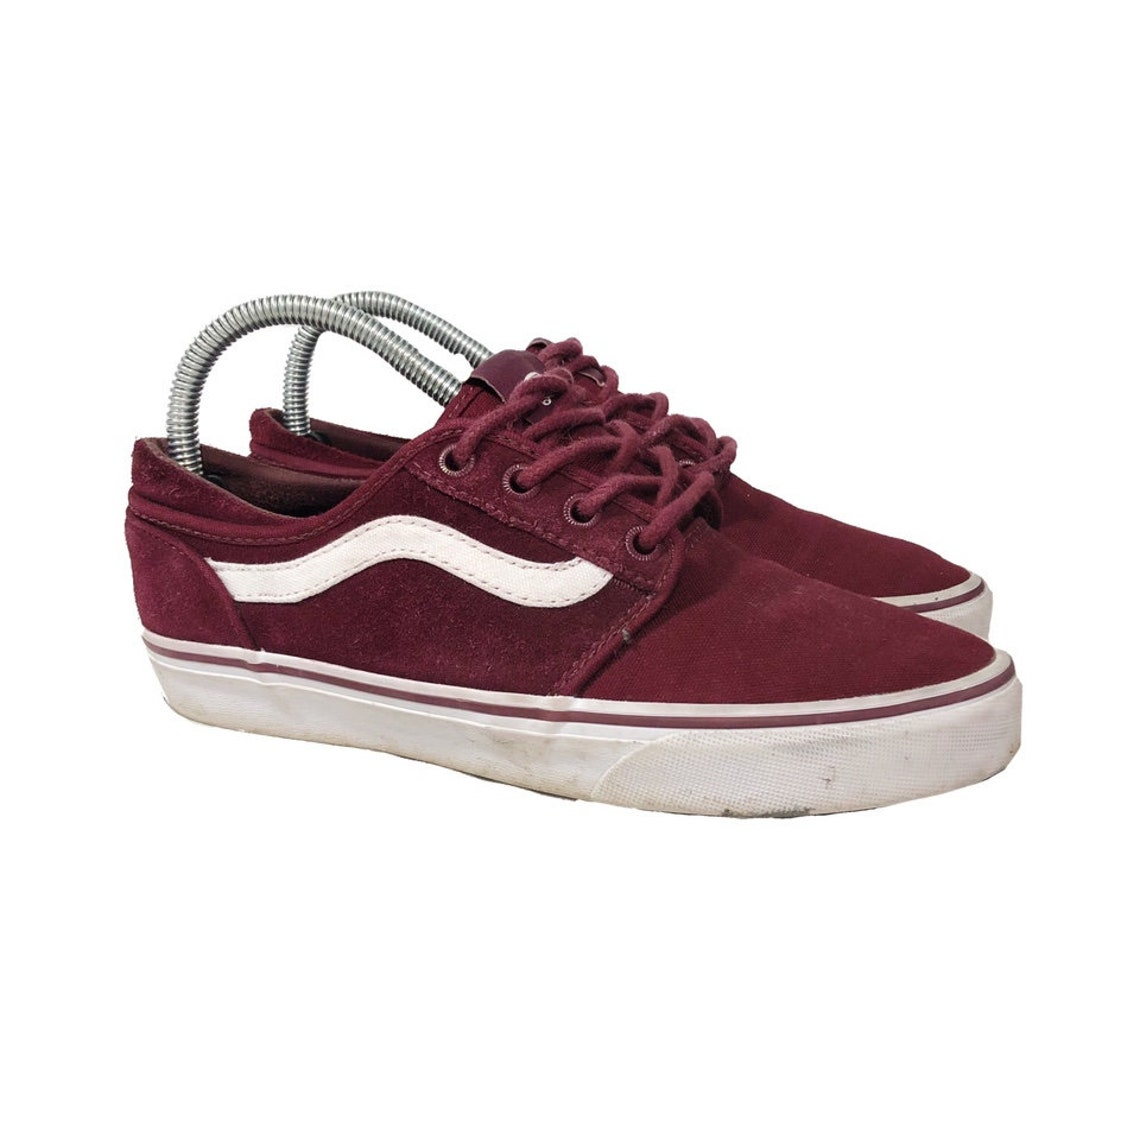 Retro Vans Old Skool Burgundy and White Trainers Size UK 5 | Etsy